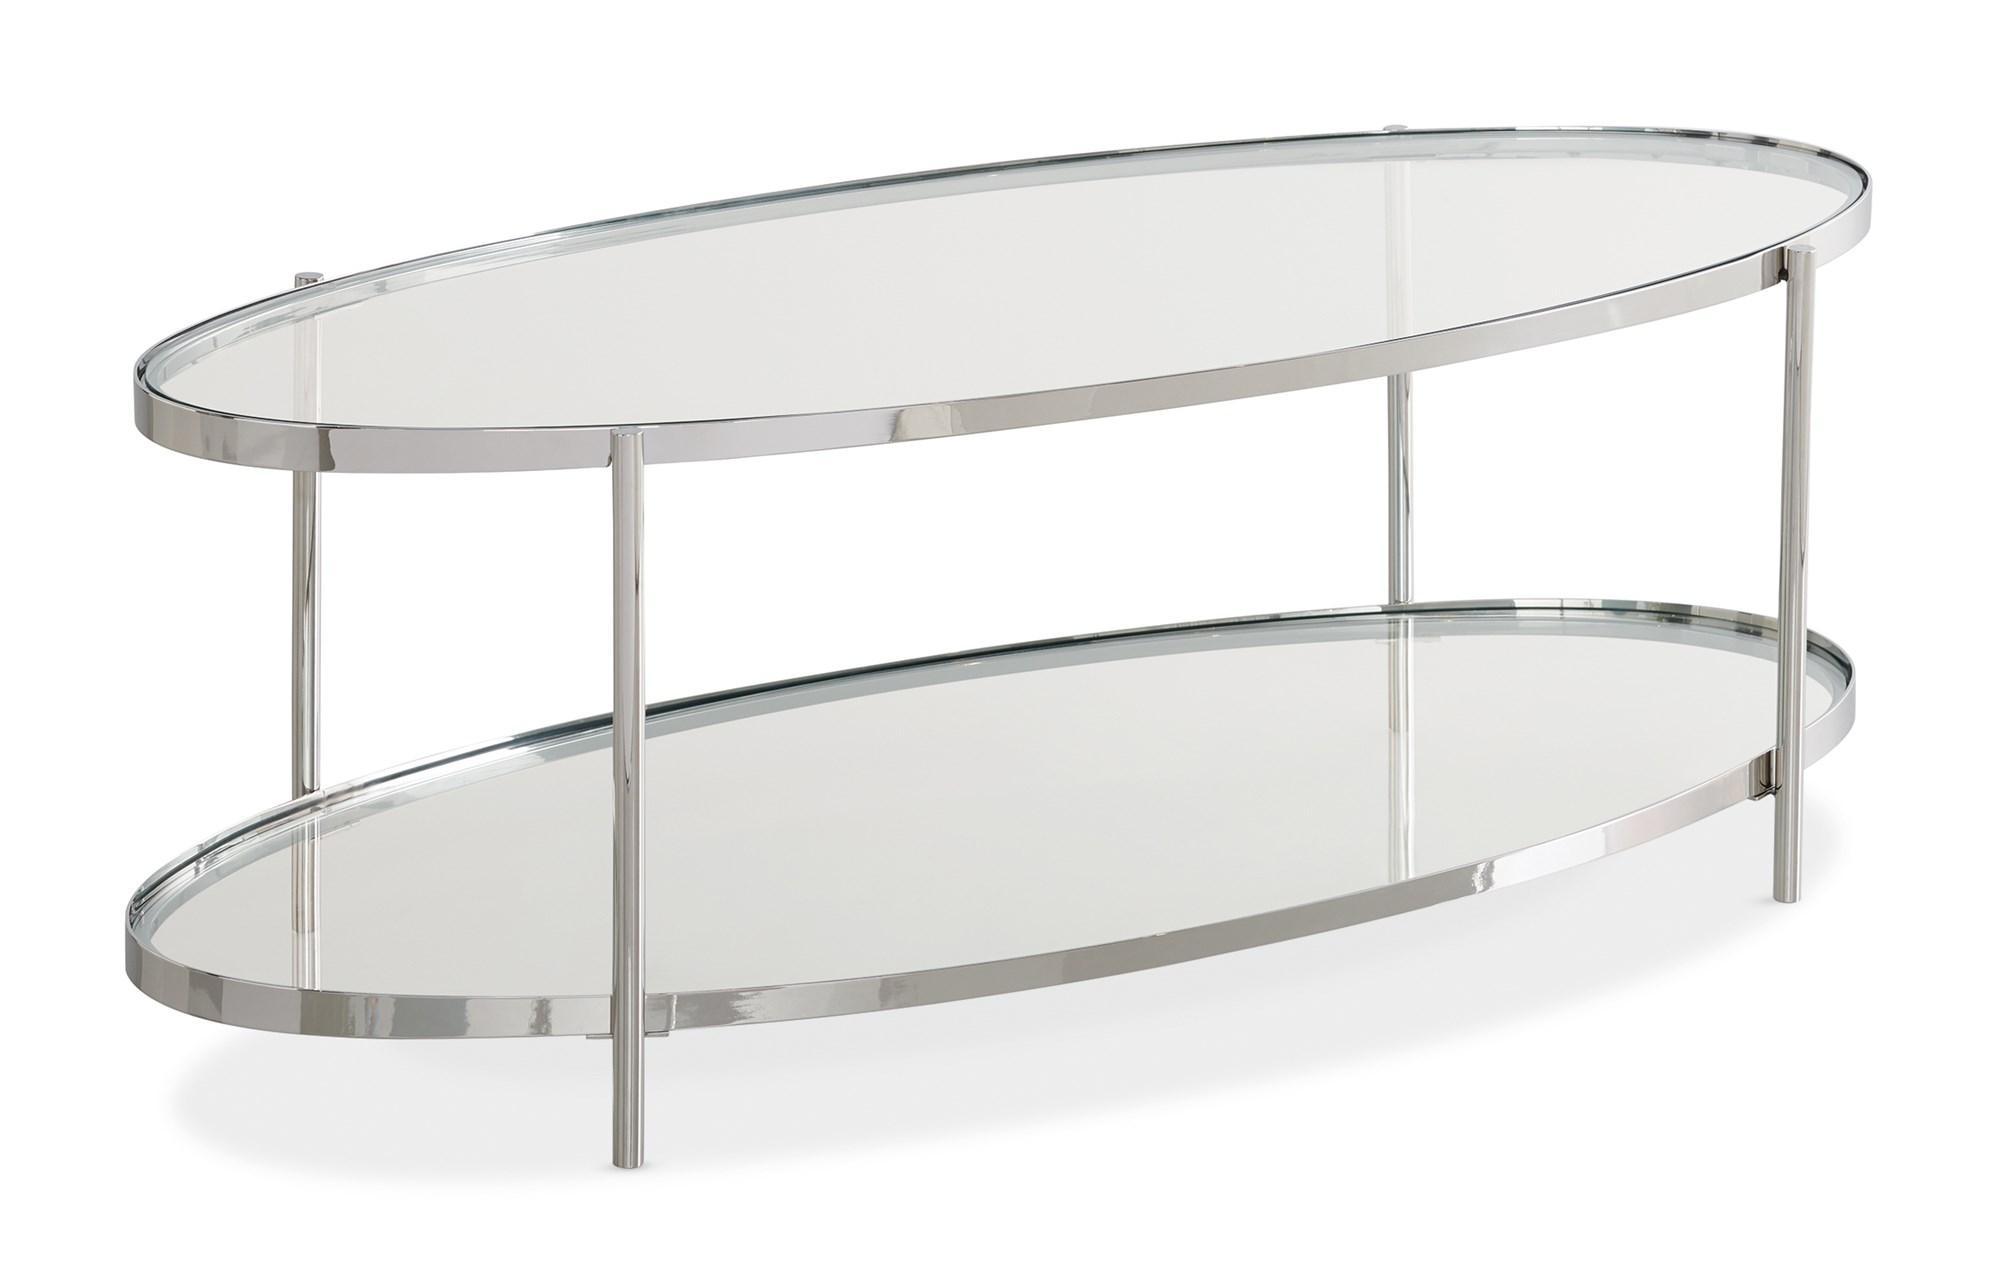 

    
Glass Top & Polished Metal Frame OVAL COCKTAIL TABLE by Caracole
